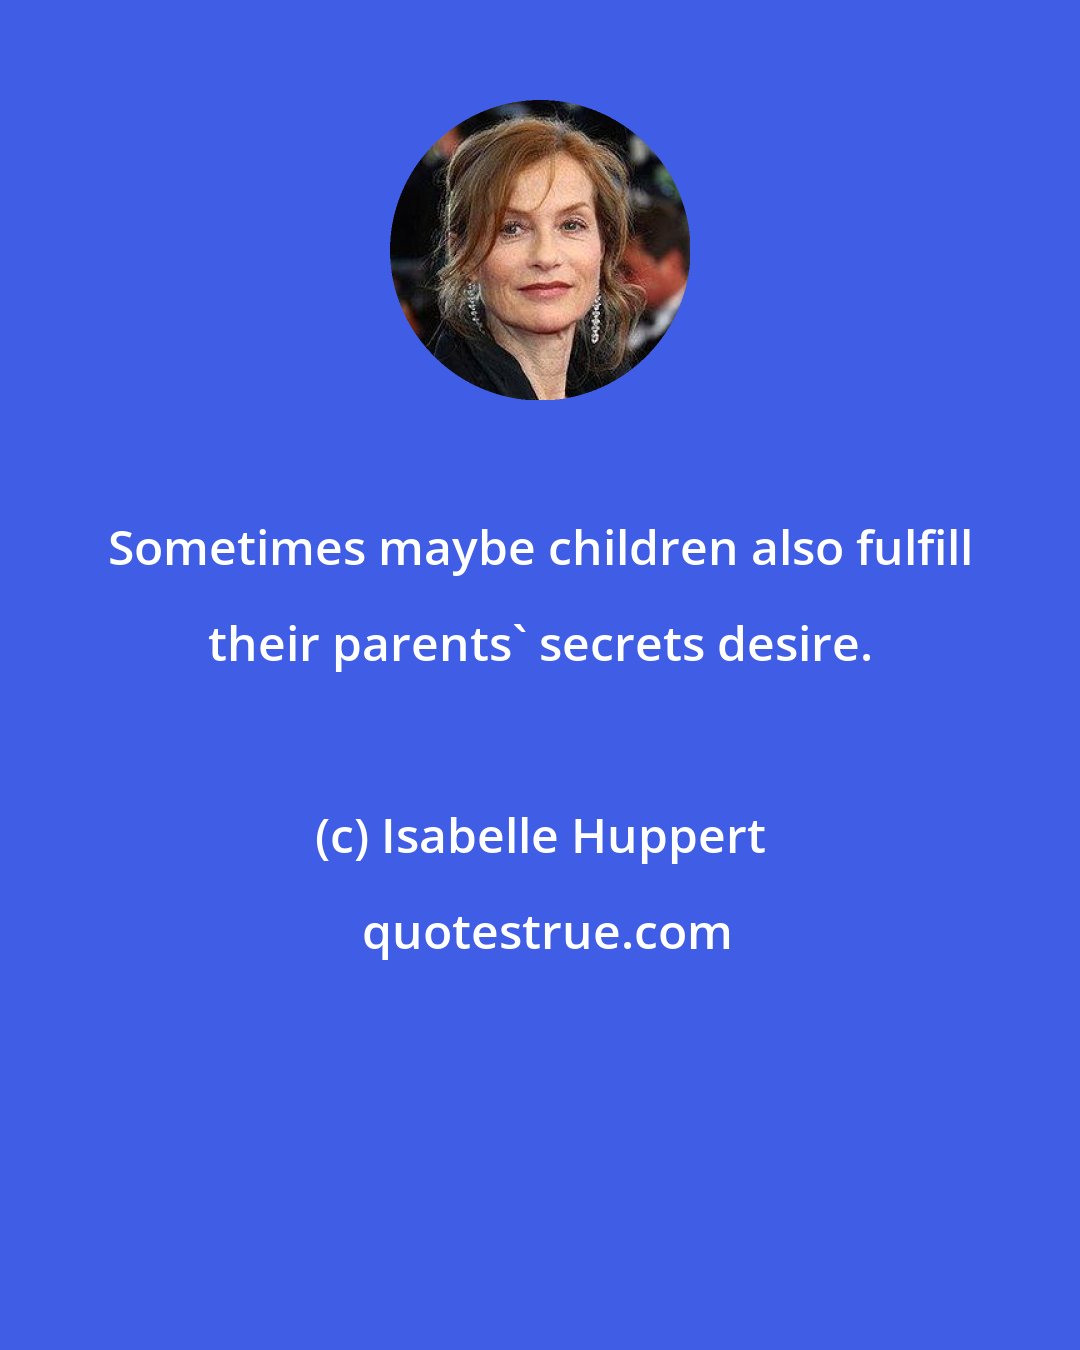 Isabelle Huppert: Sometimes maybe children also fulfill their parents' secrets desire.